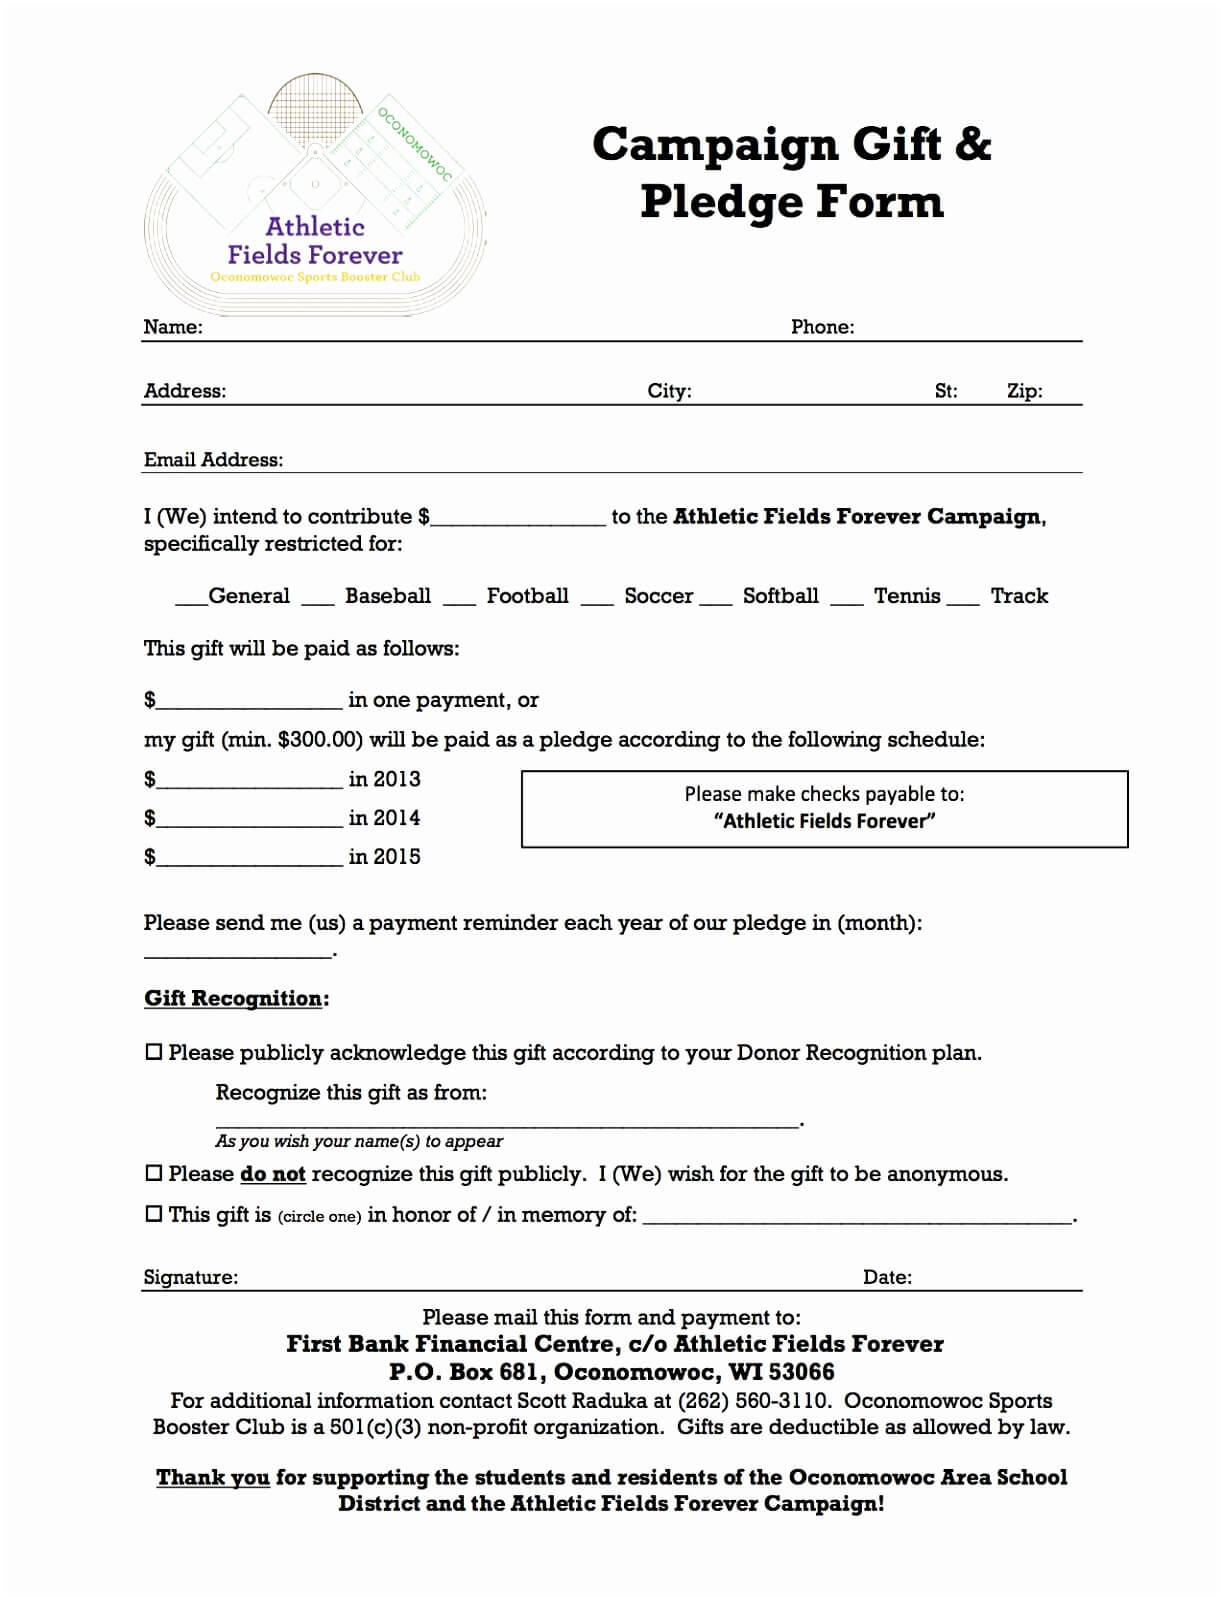 020 Samplege Forms For Fundraising Design Charity Form For Fundraising Pledge Card Template